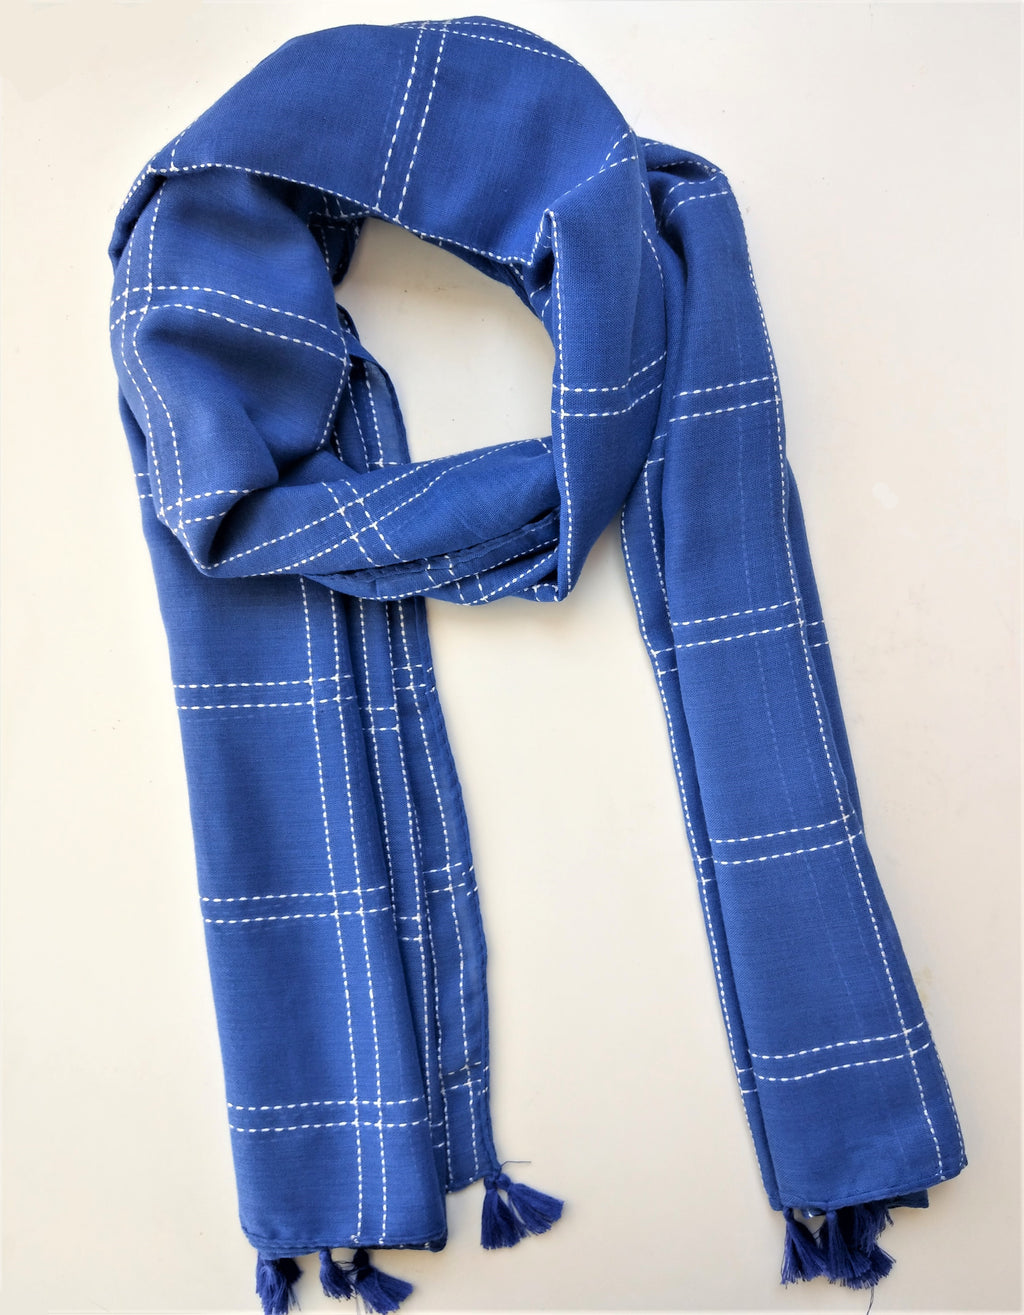 Vibrant Blue Scarf with Embroidered Stripes